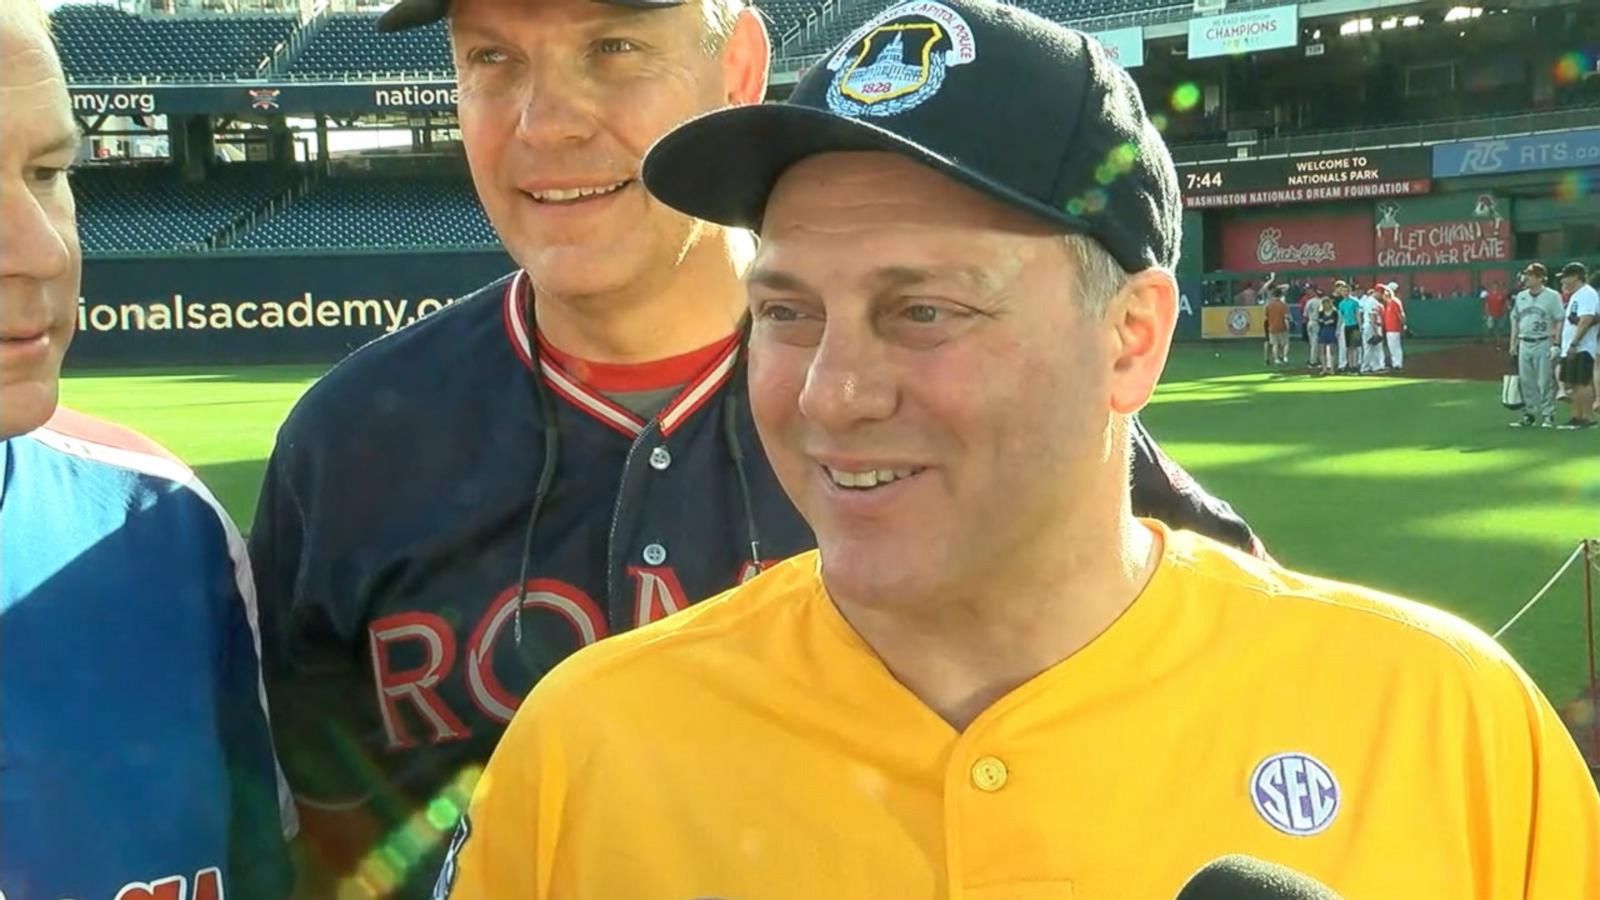 Steve Scalise to start at second base 1 year after shooting Good